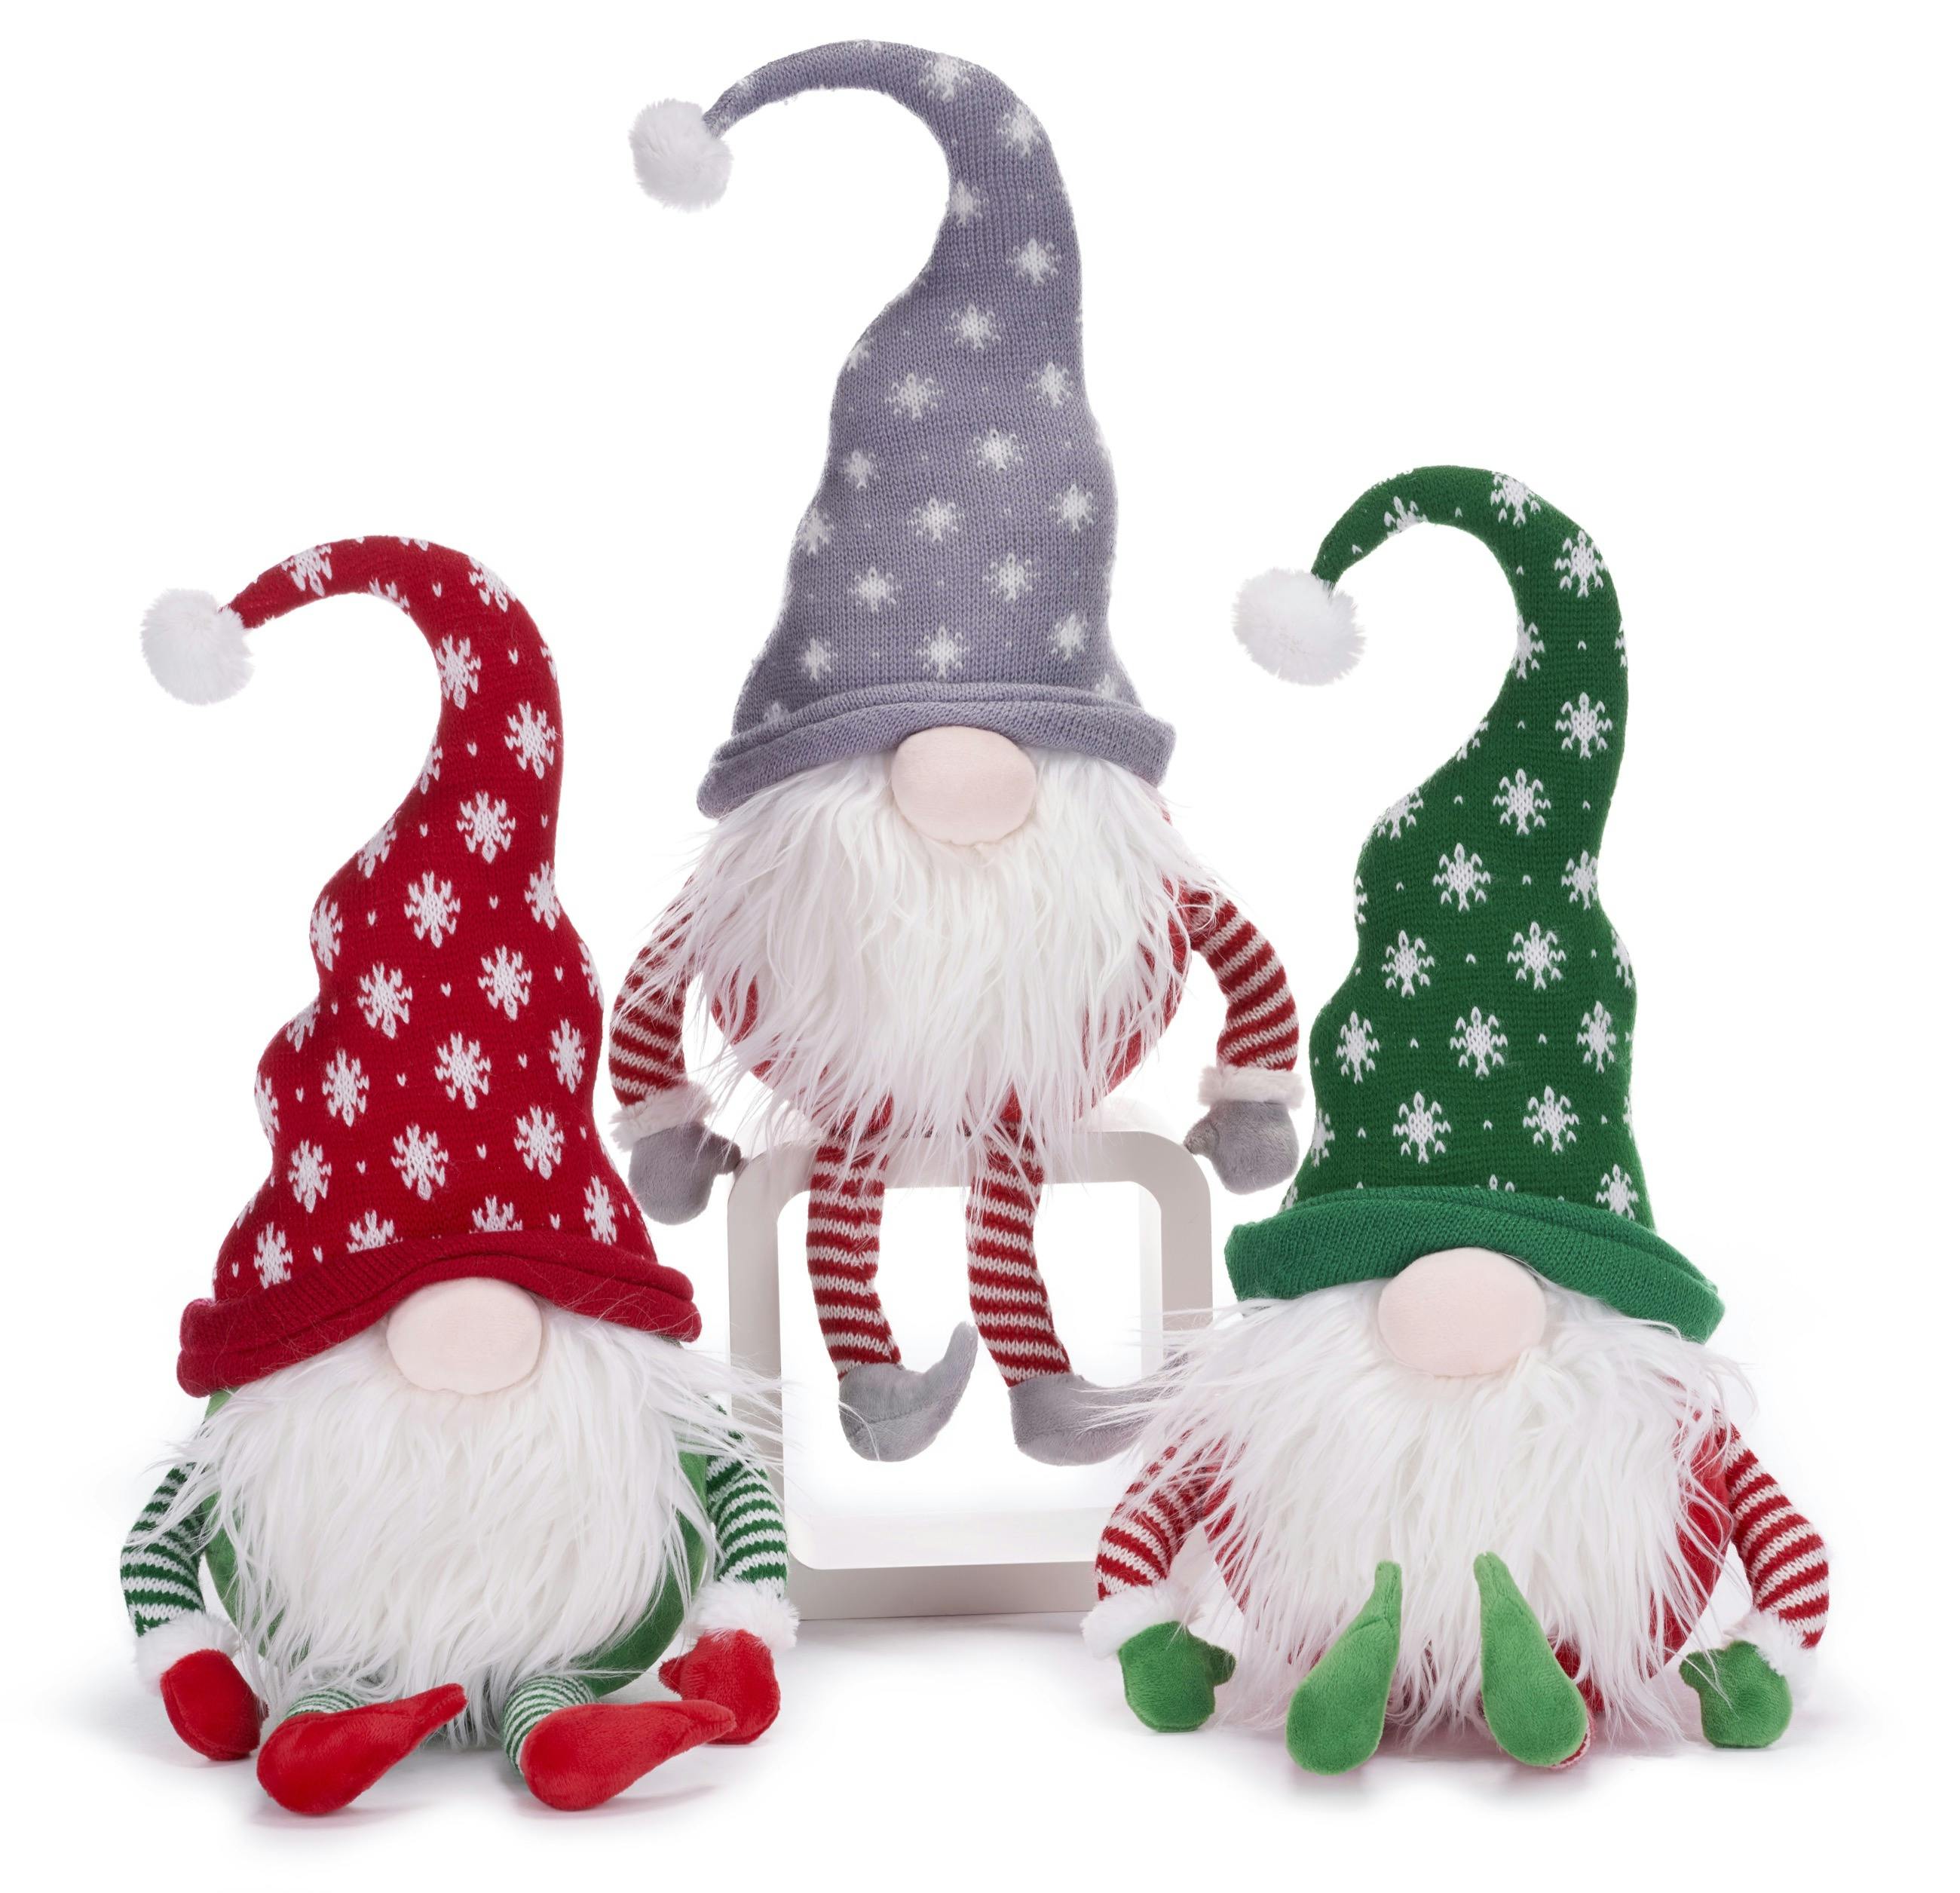 Product - Christmas Gnomes in Knitted Material 3 Ass